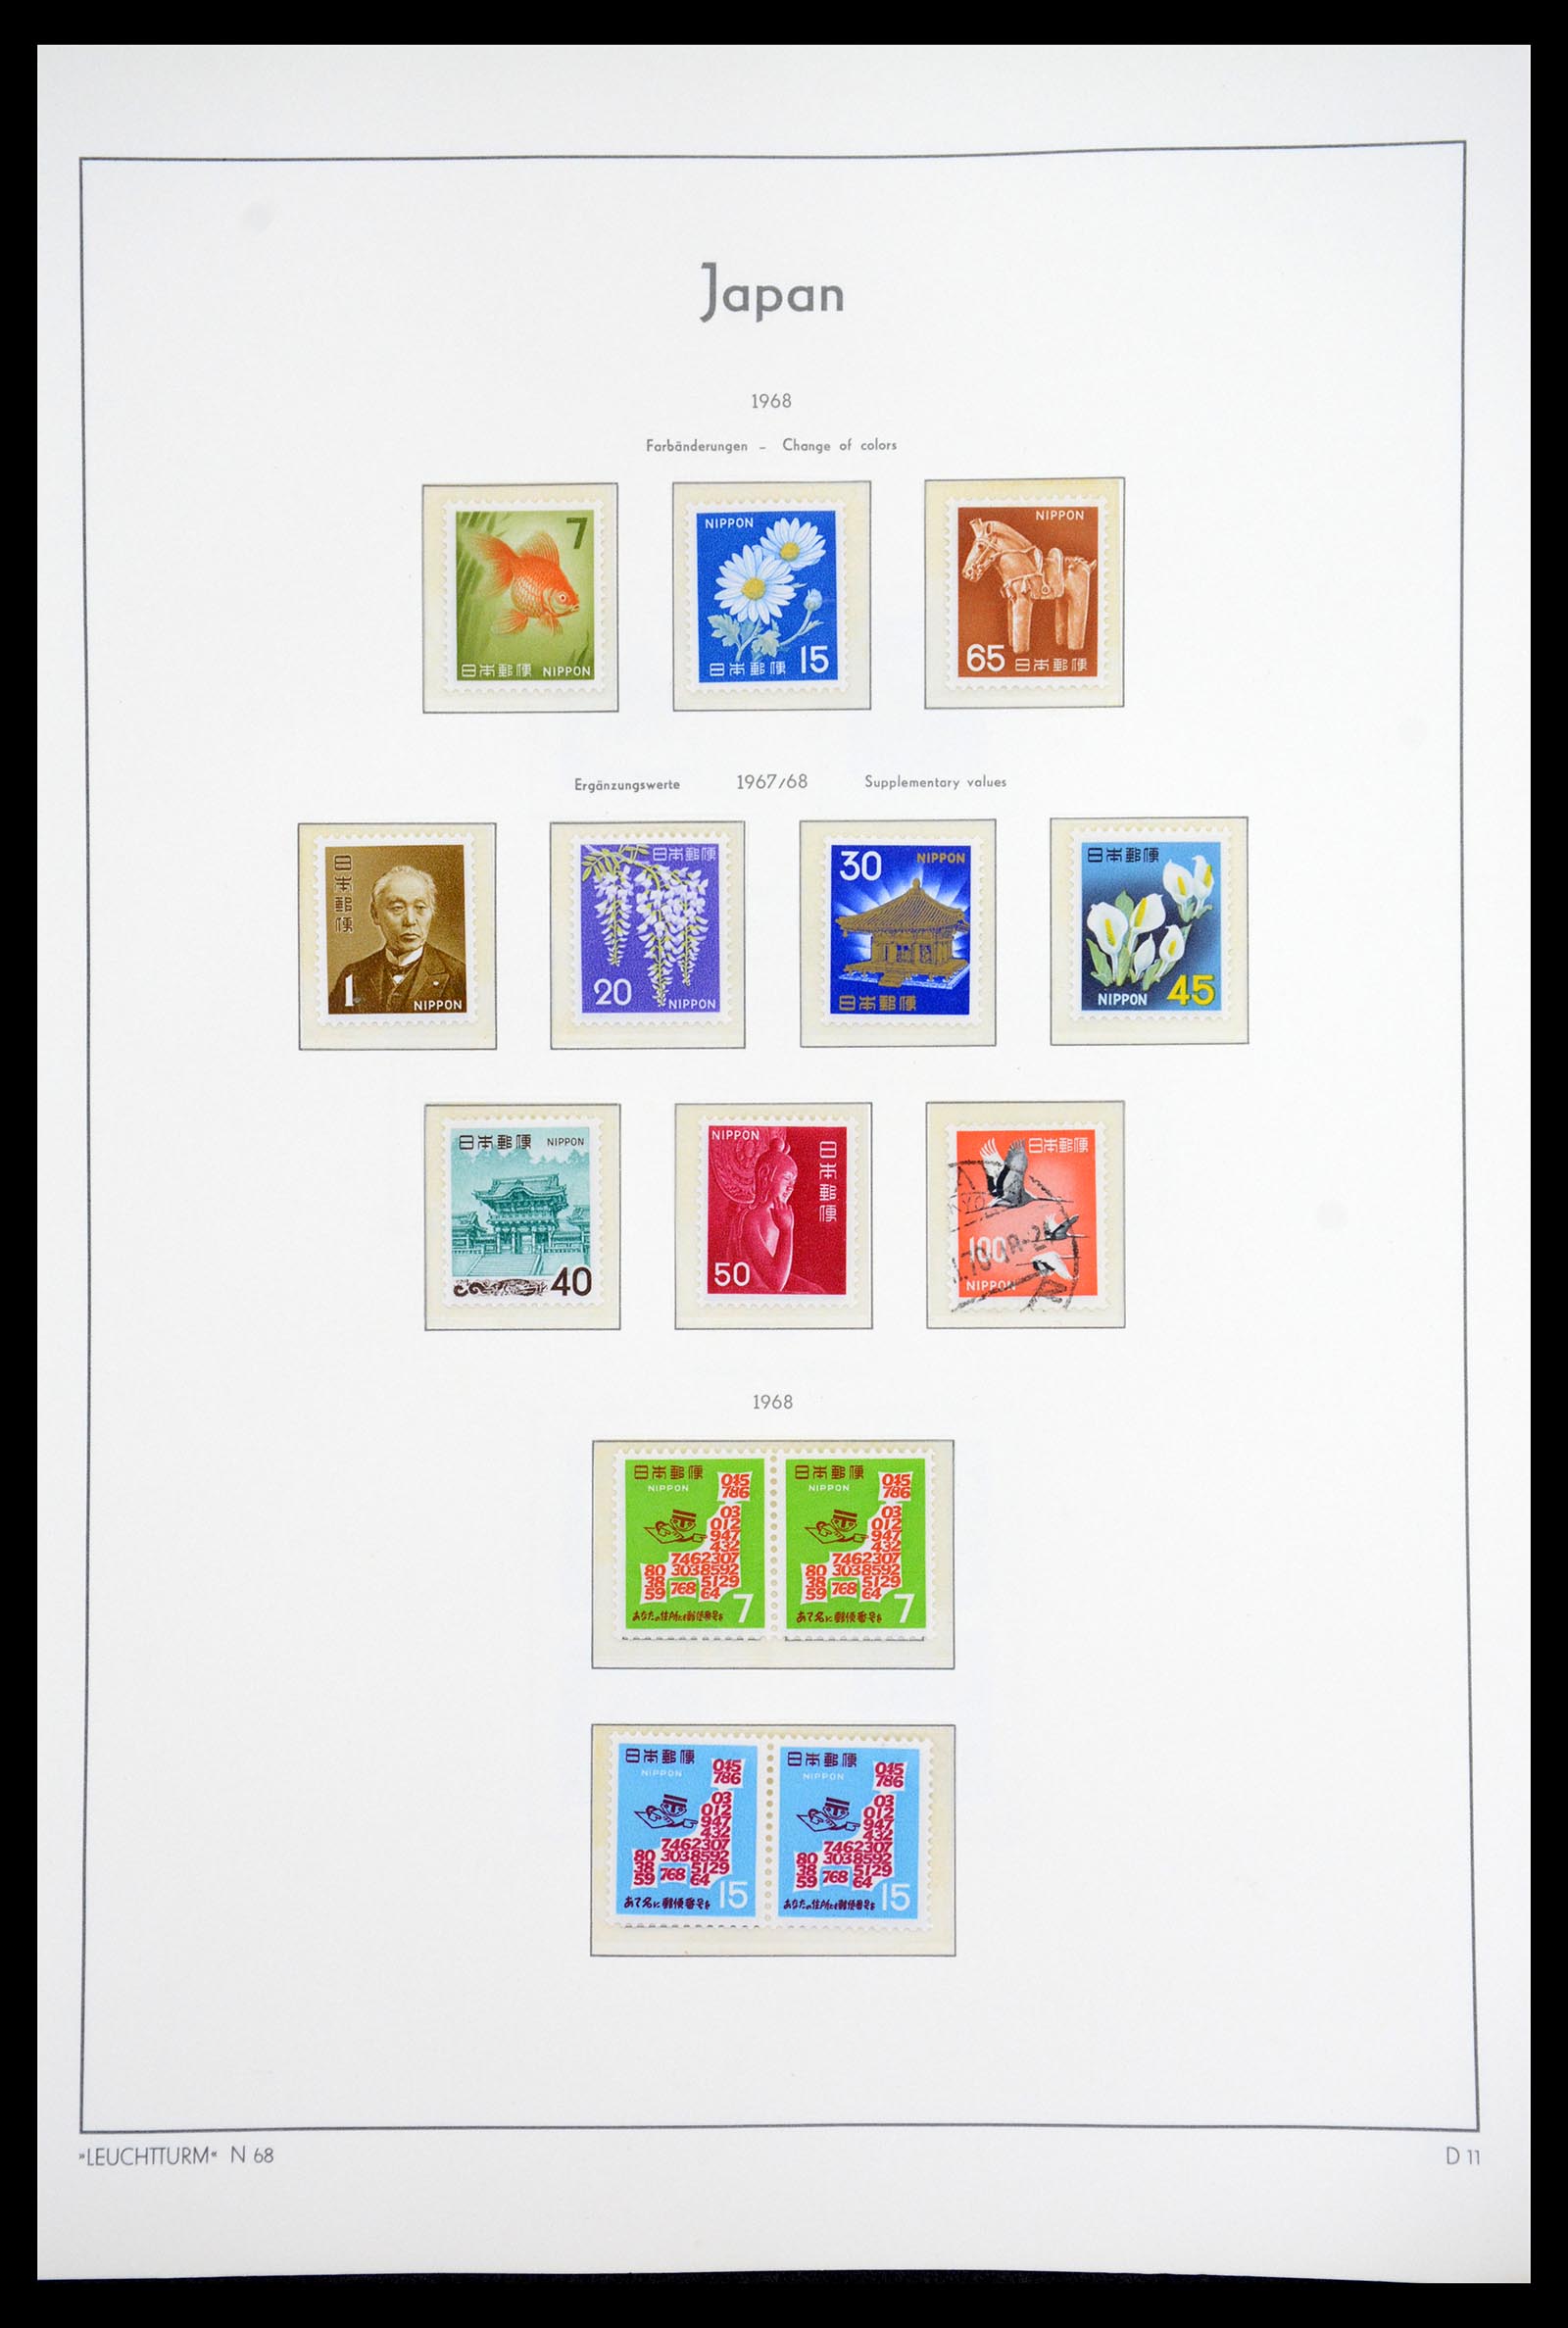 36755 034 - Stamp collection 36755 Japan supercollection 1871-1988.